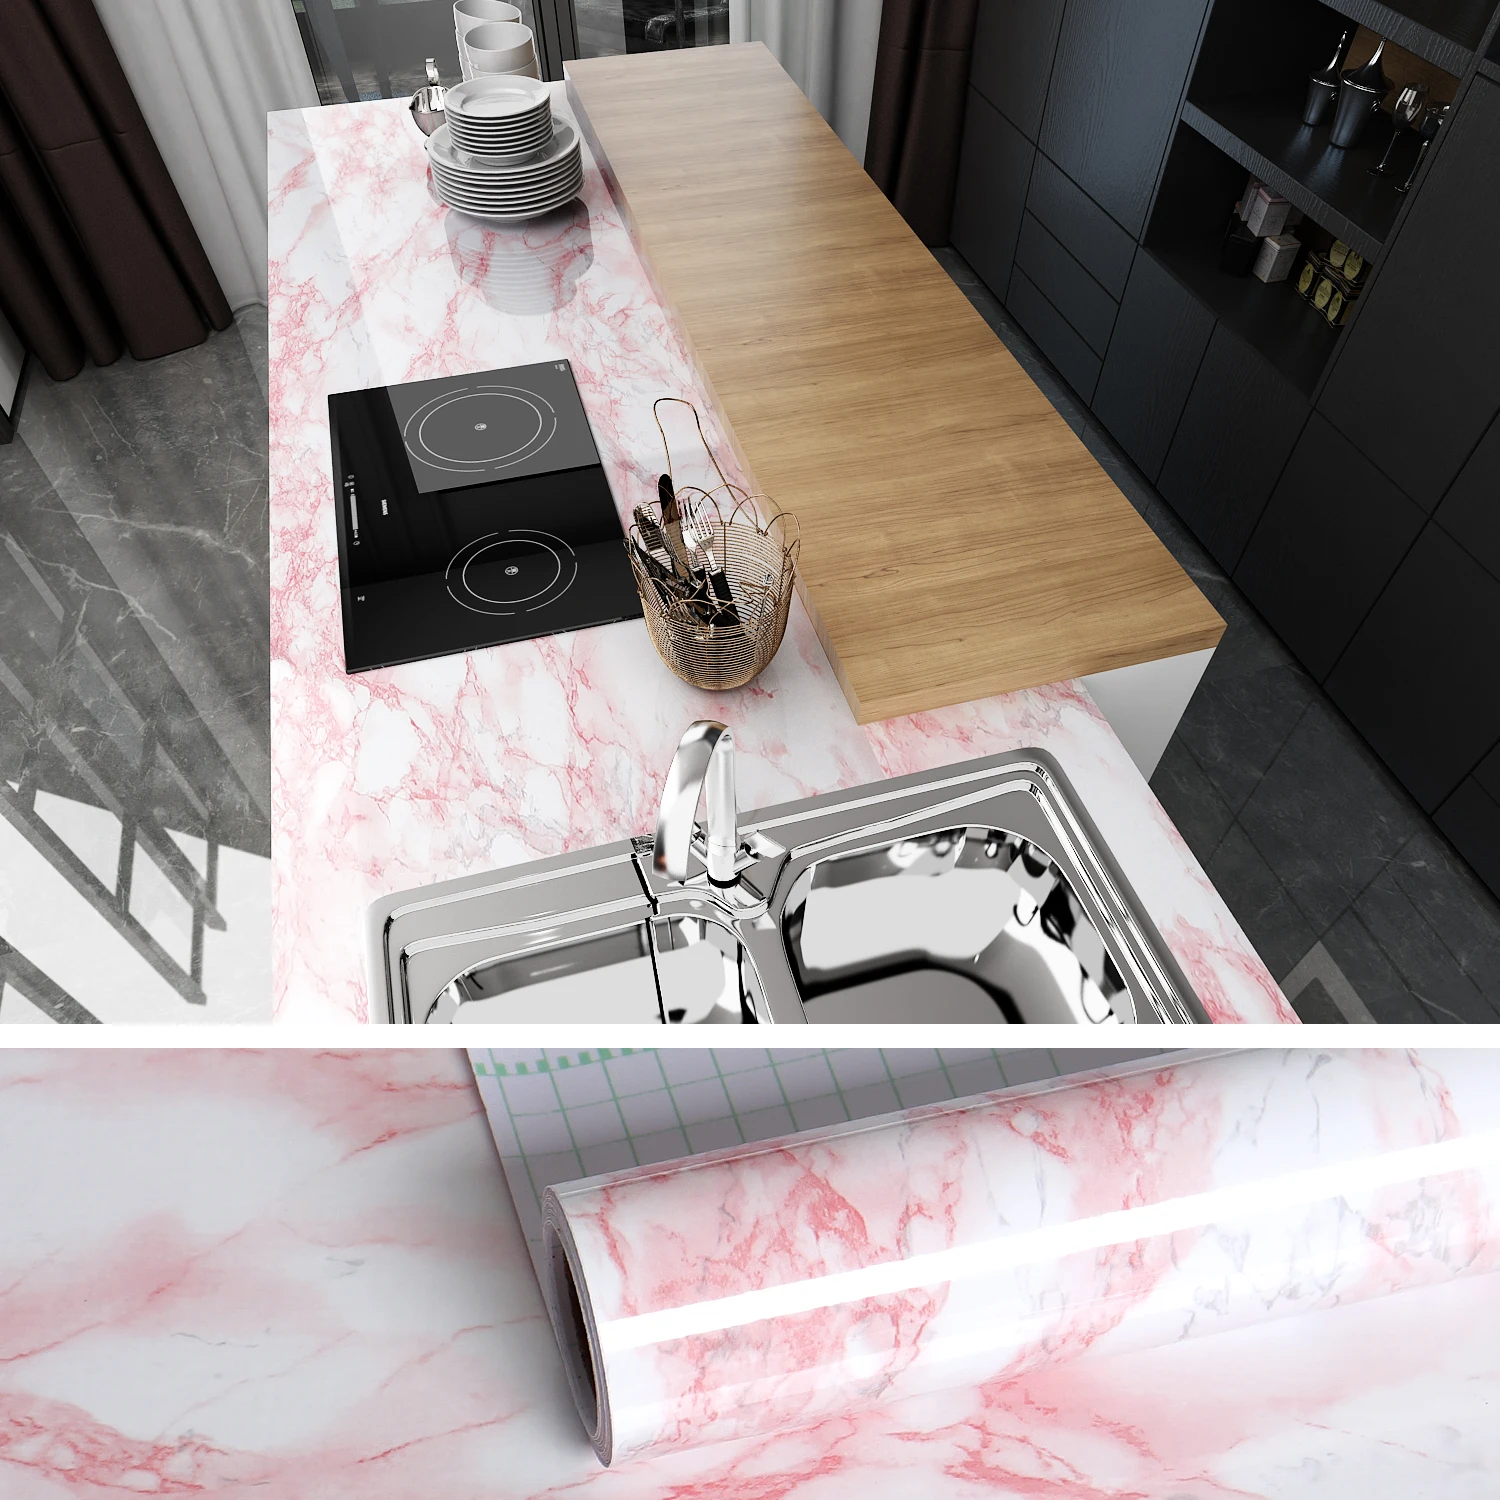 Pink Marble Wallpapers Stick and Peel Stickers Self Adhesive Removable Waterproof Wall Covering Table Countertop Cabinet Drawer haixin tray under desk drawer organizer table storage box self adhesive wardrobe hidden organizer office stationery organizer